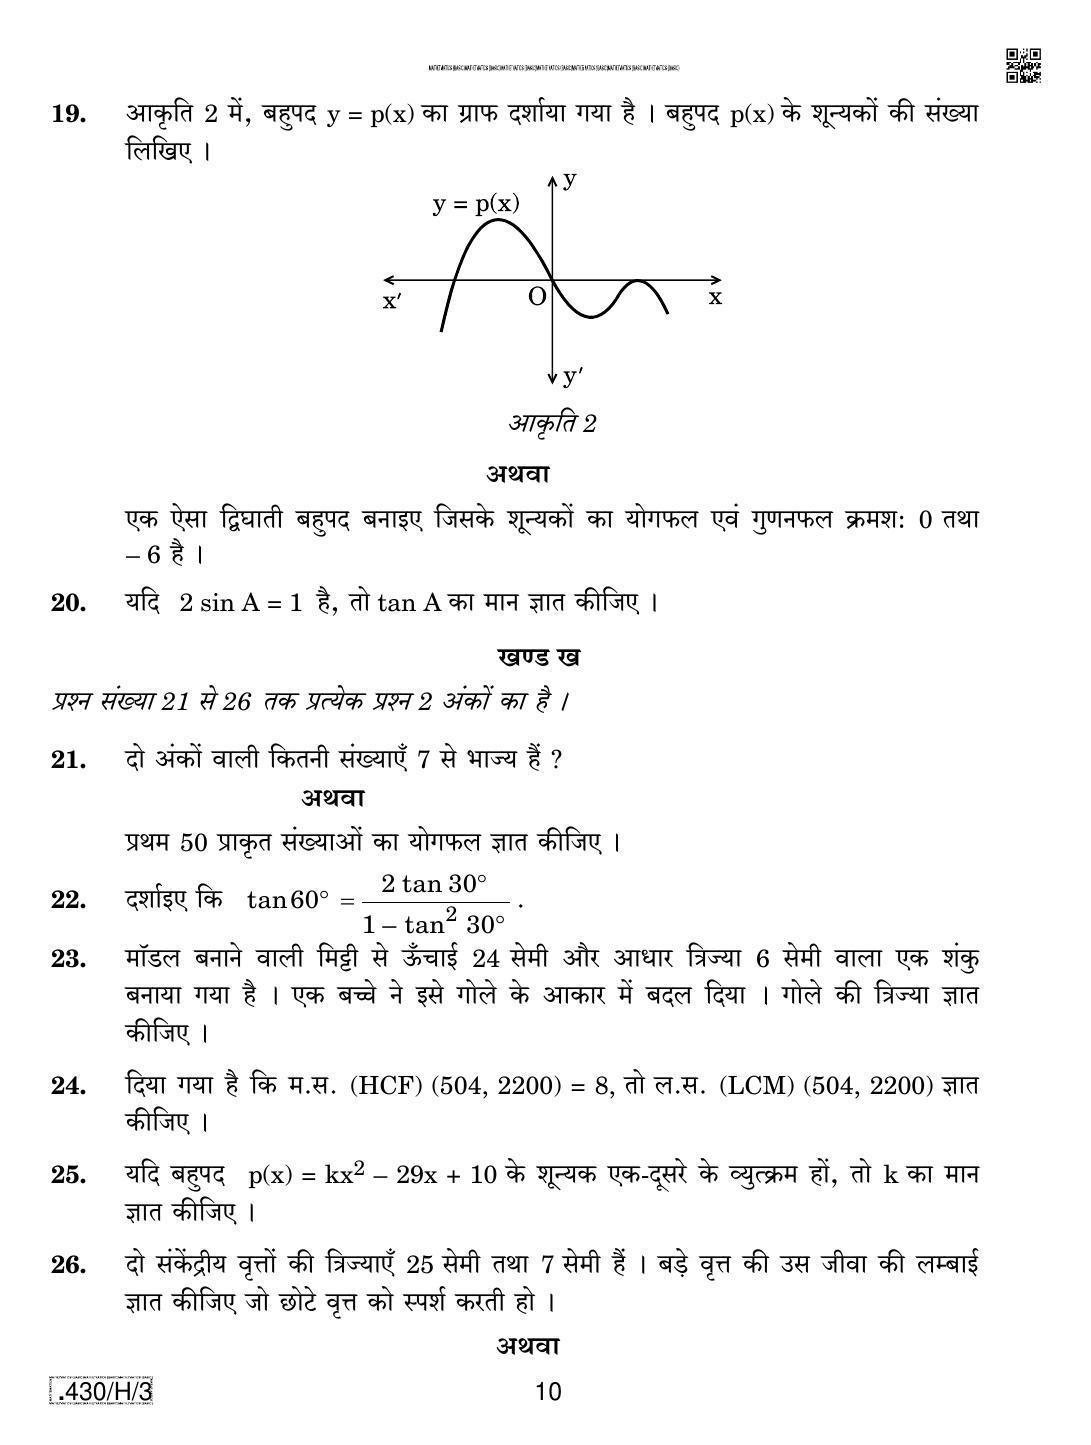 CBSE Class 10 430-C-3 - Maths (Basic) 2020 Compartment Question Paper - Page 10